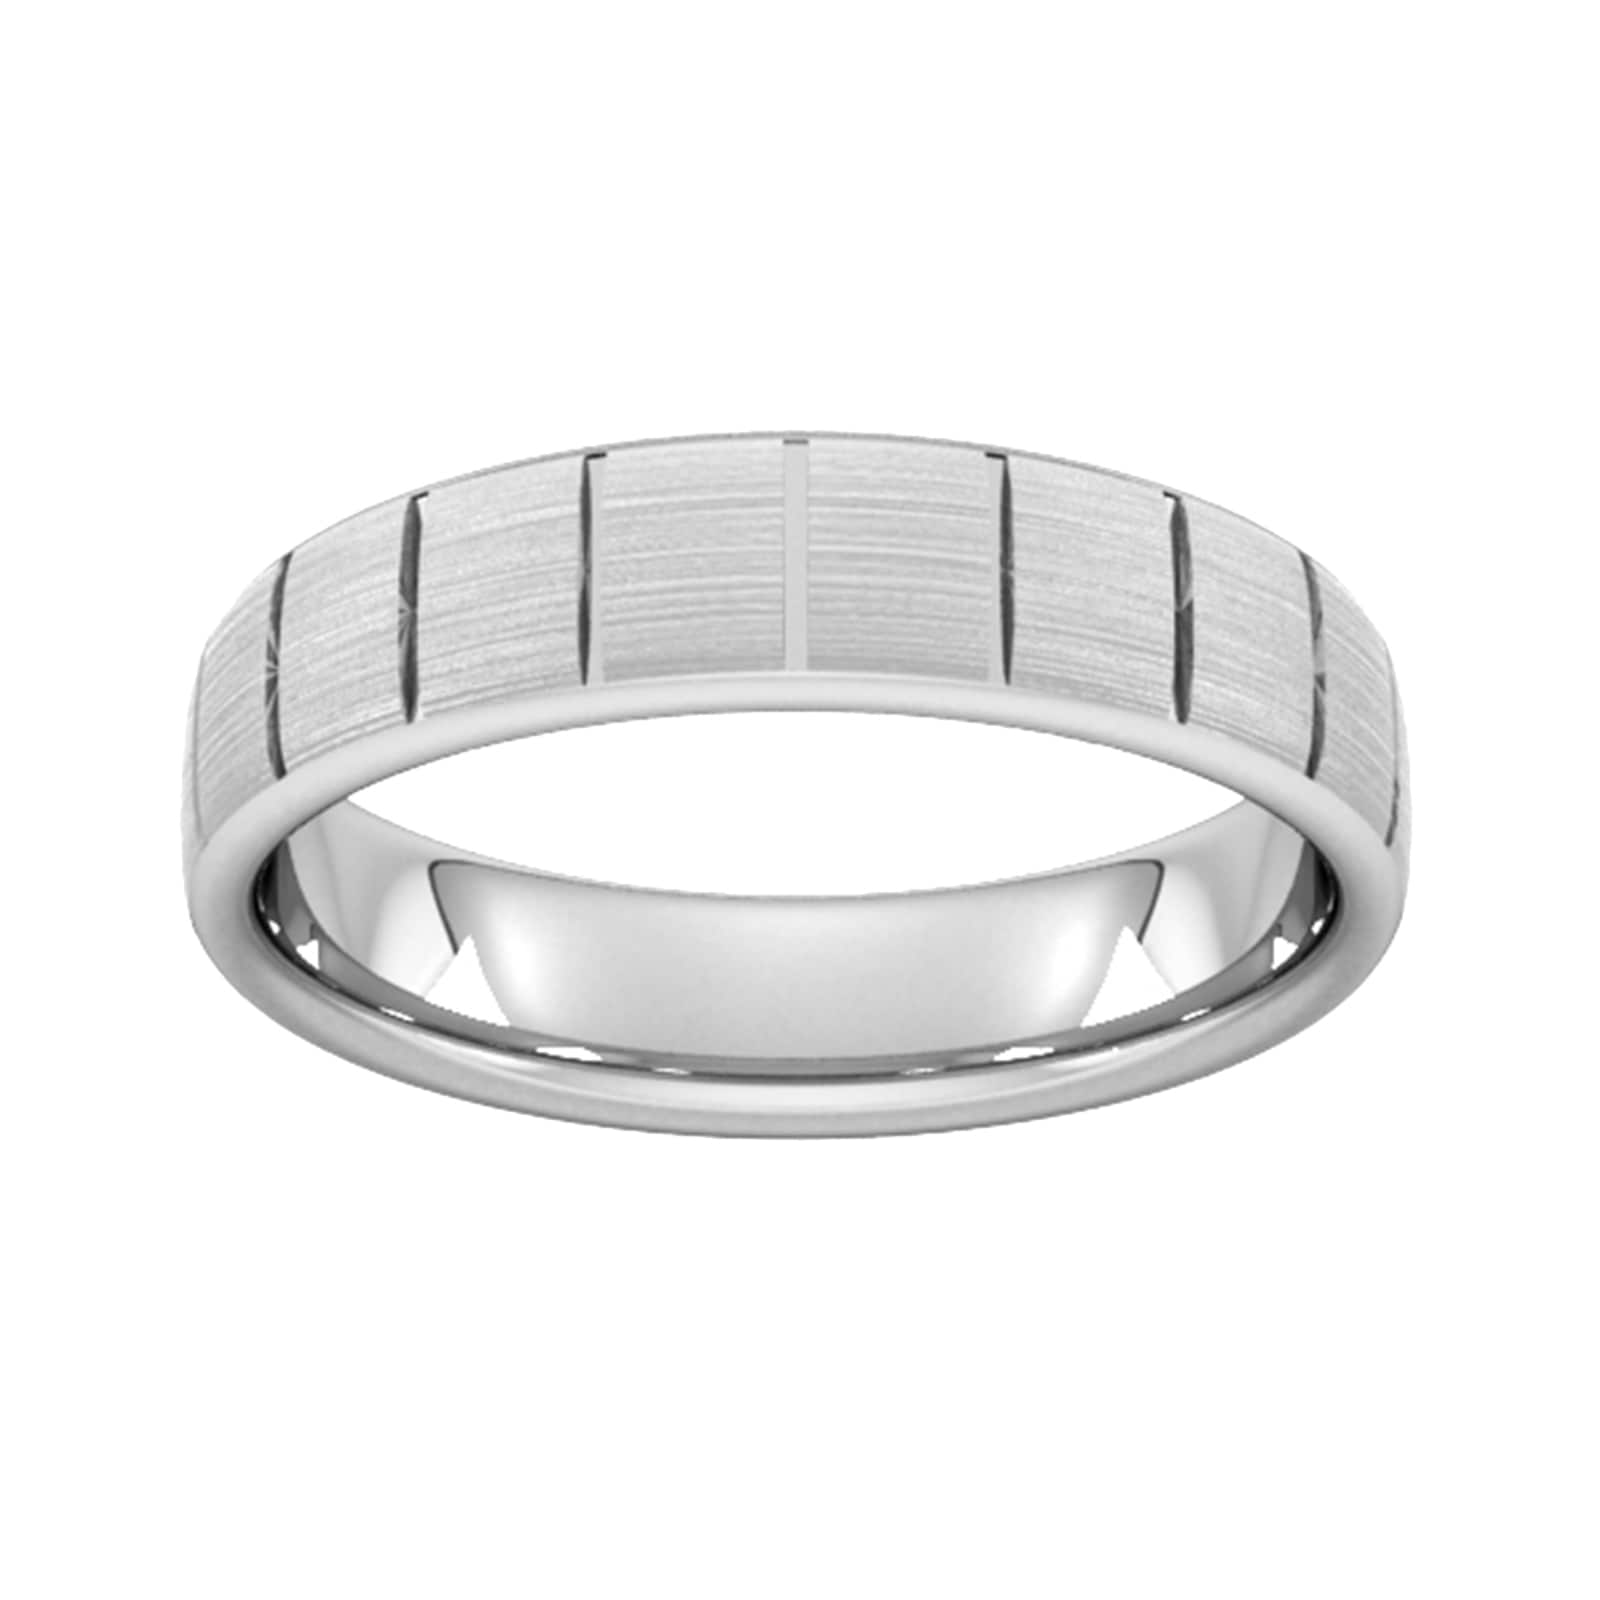 5mm Slight Court Standard Vertical Lines Wedding Ring In 18 Carat White Gold - Ring Size M